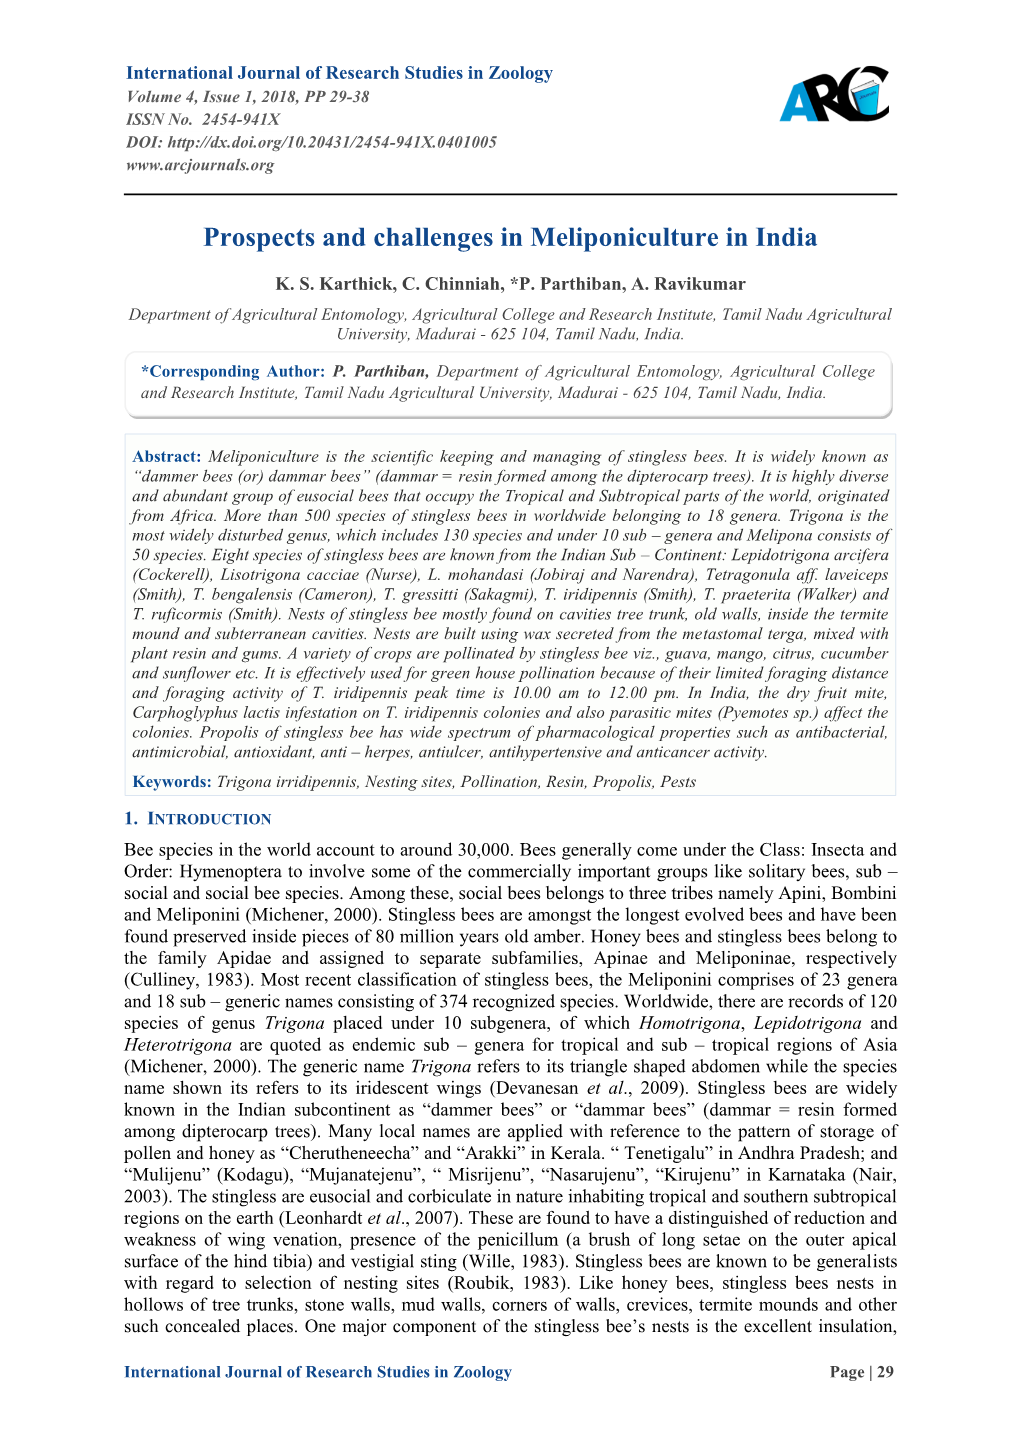 Prospects and Challenges in Meliponiculture in India